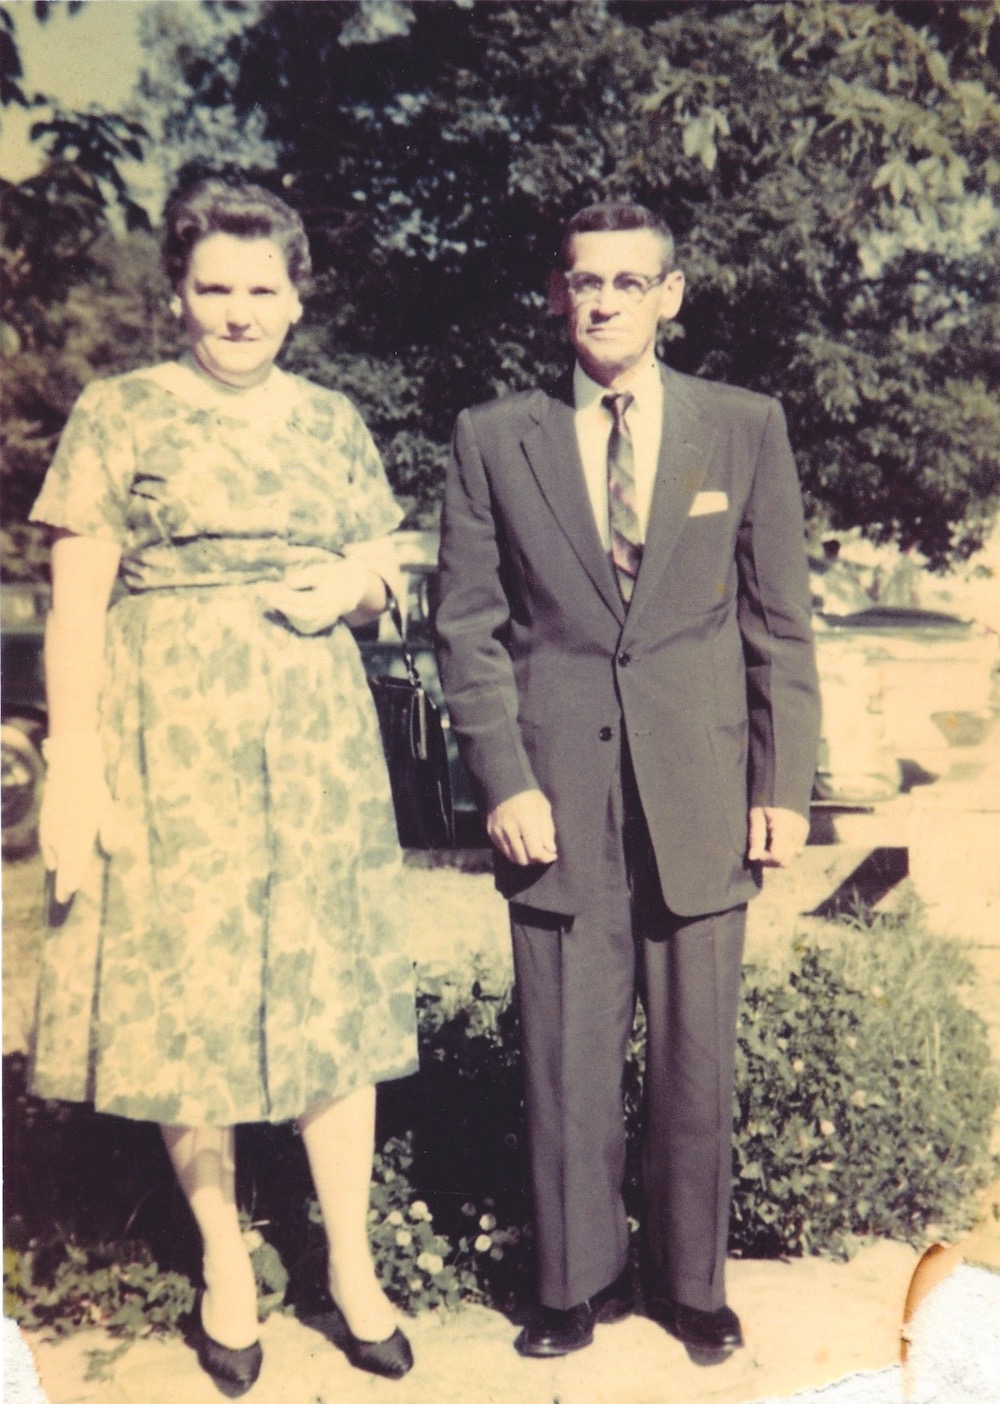 K.C. Potter’s mother and father, Amanda Potter and Paul Potter, at his college graduation for Berea College, Berea, KY, 1961.